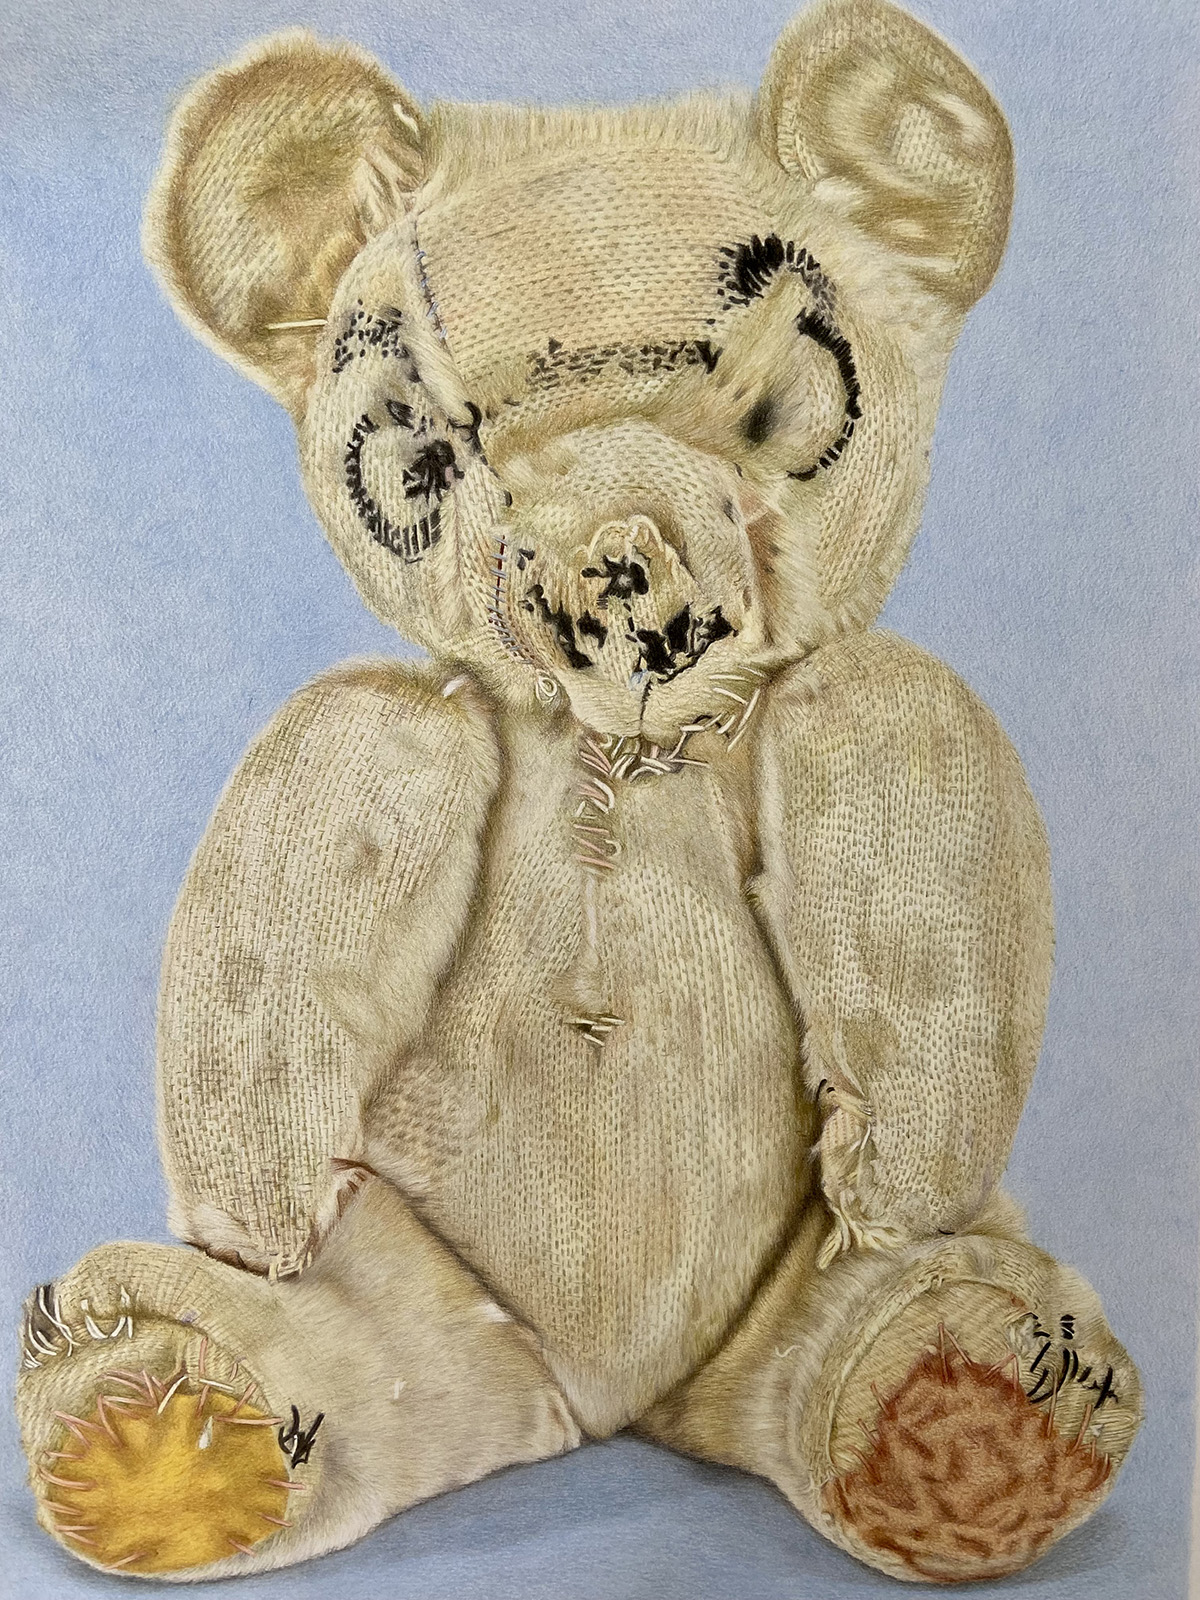 My brother's childhood teddy bear. This is featured in the 'CP Hidden Treasures 8' magazine